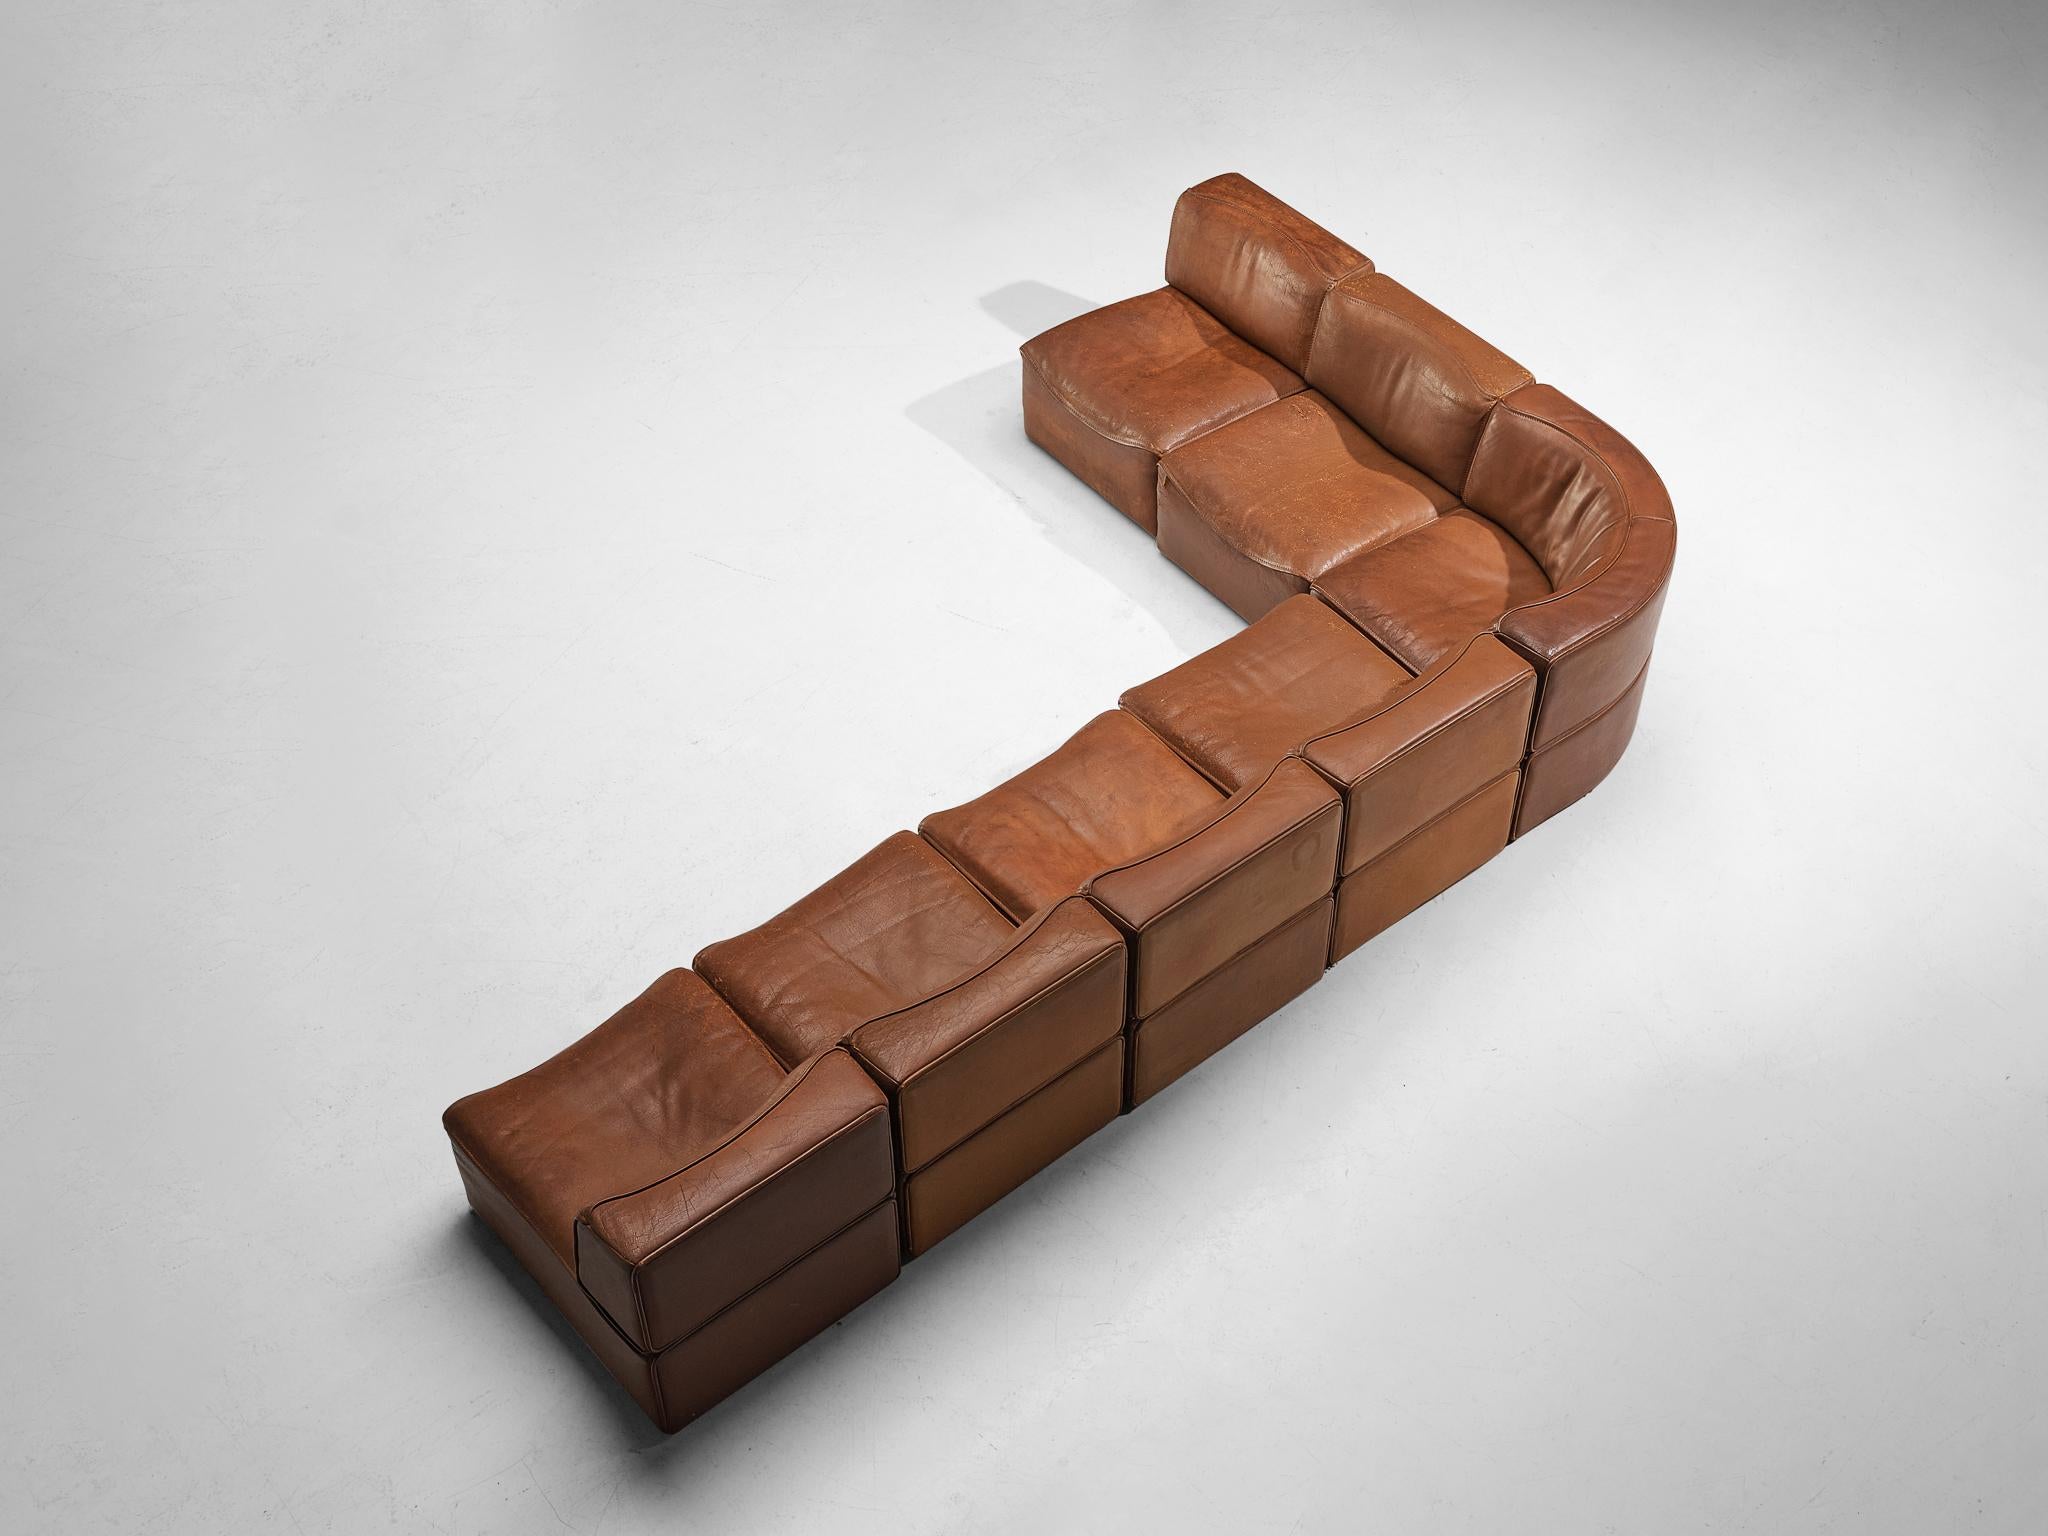 De Sede, 'DS-15' sectional sofa, patinated leather, Switzerland, 1970s.

This high-quality sectional sofa designed by De Sede in the 1970s contains six regular elements and one corner elements, making it possible to arrange this sofa to your own